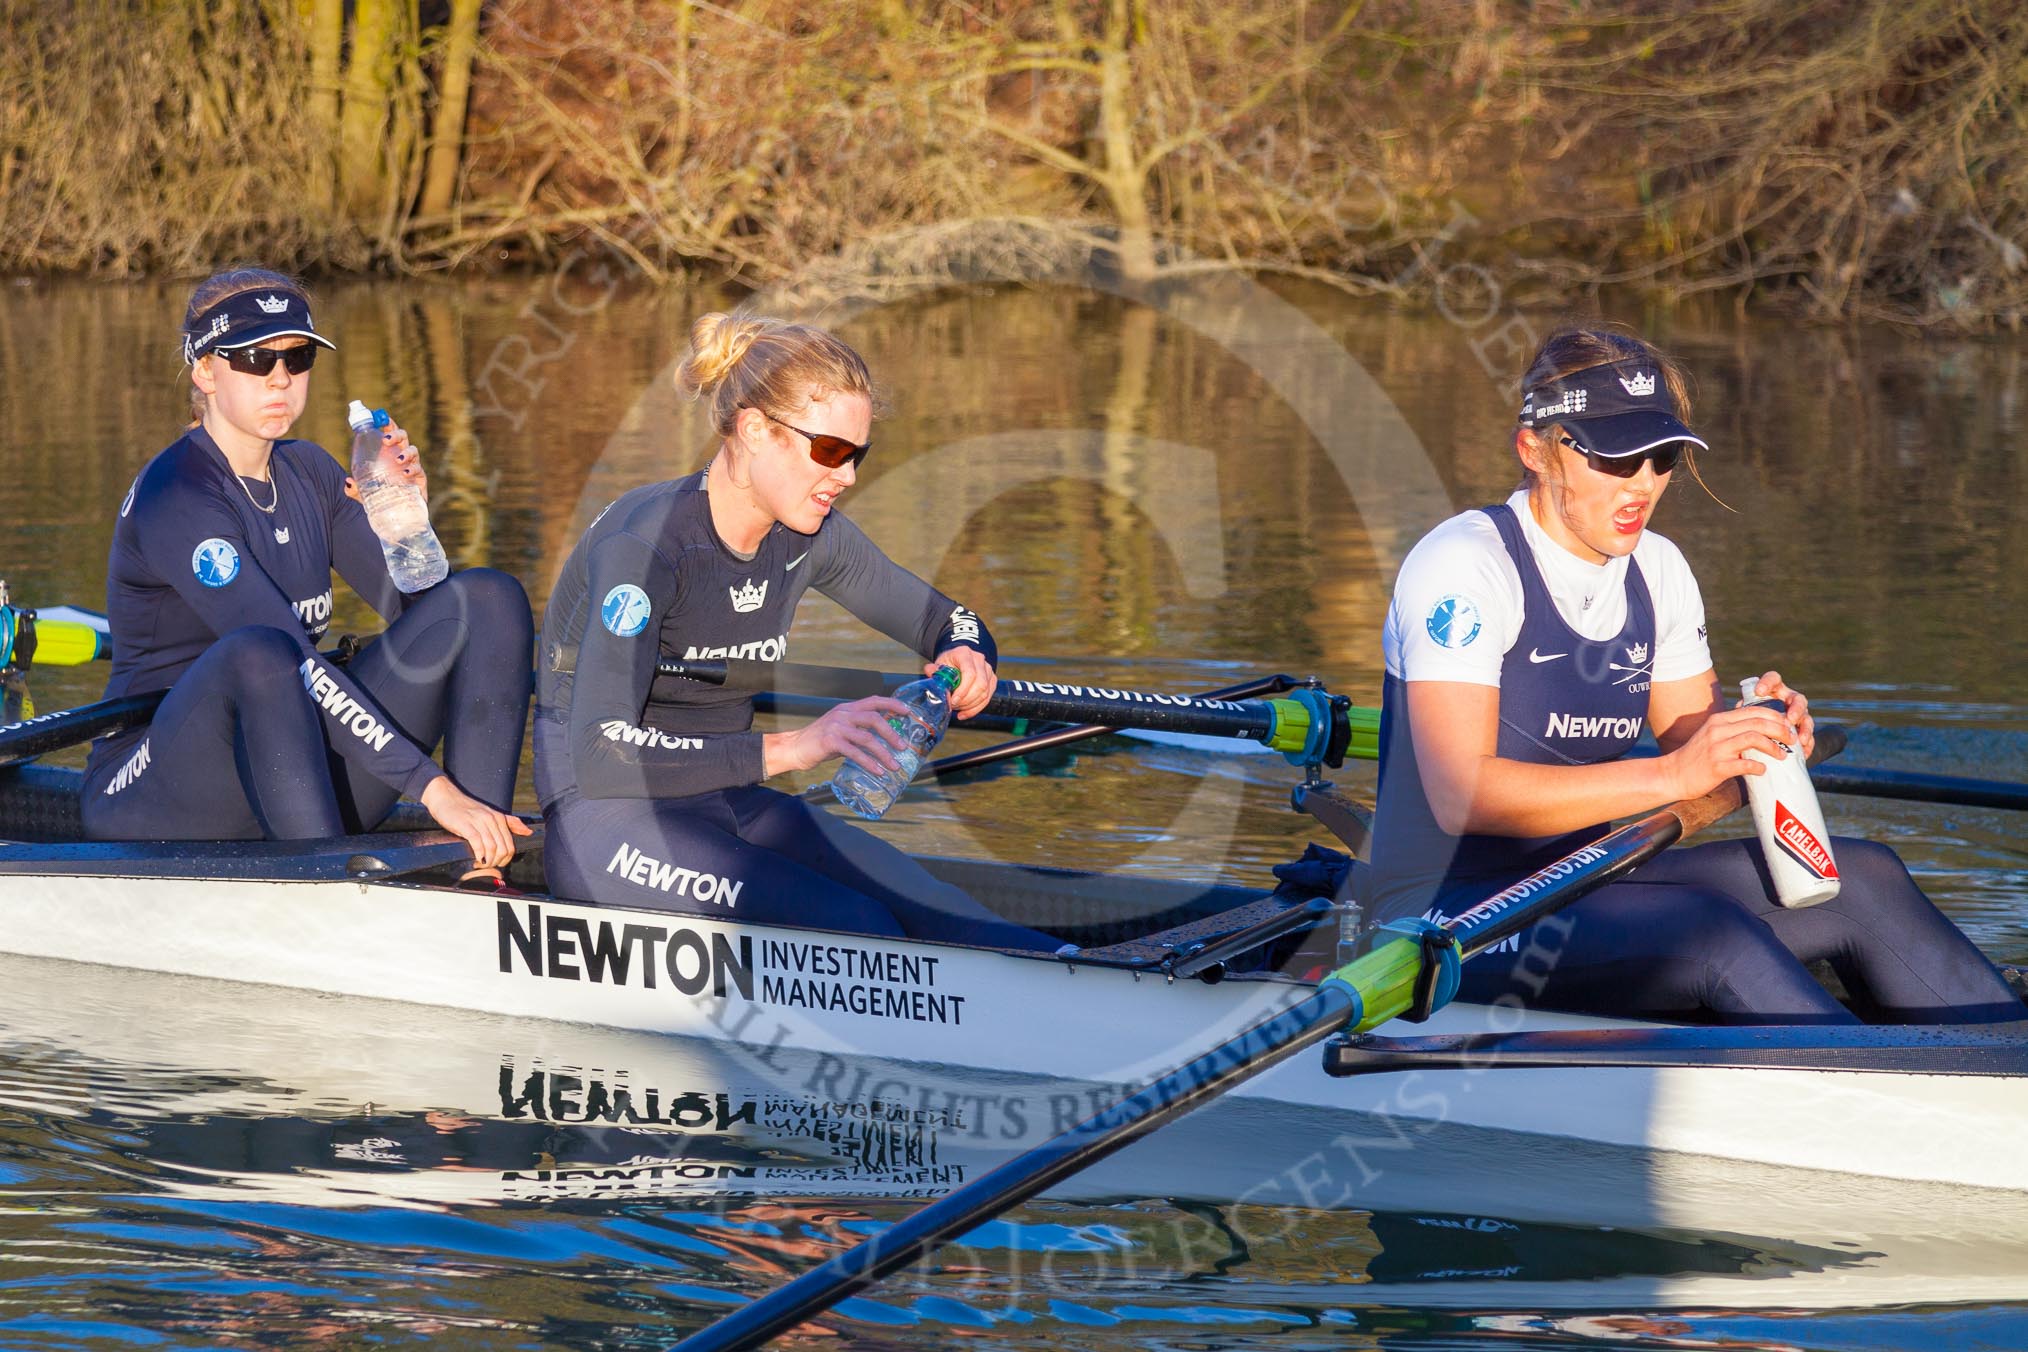 The Boat Race season 2015: OUWBC training Wallingford.

Wallingford,

United Kingdom,
on 04 March 2015 at 17:02, image #246